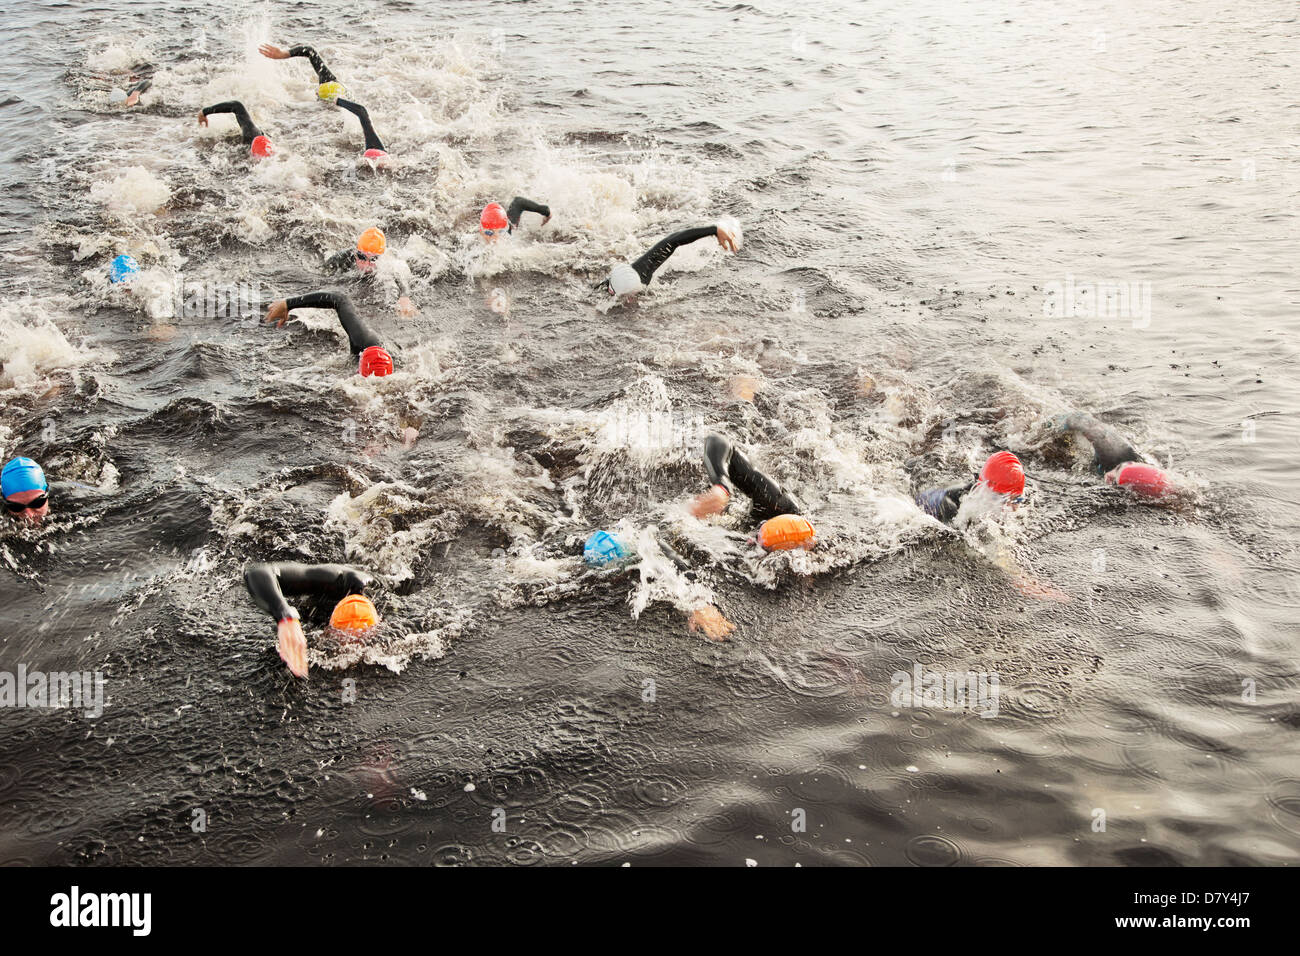 Triathletes swimming in water Stock Photo